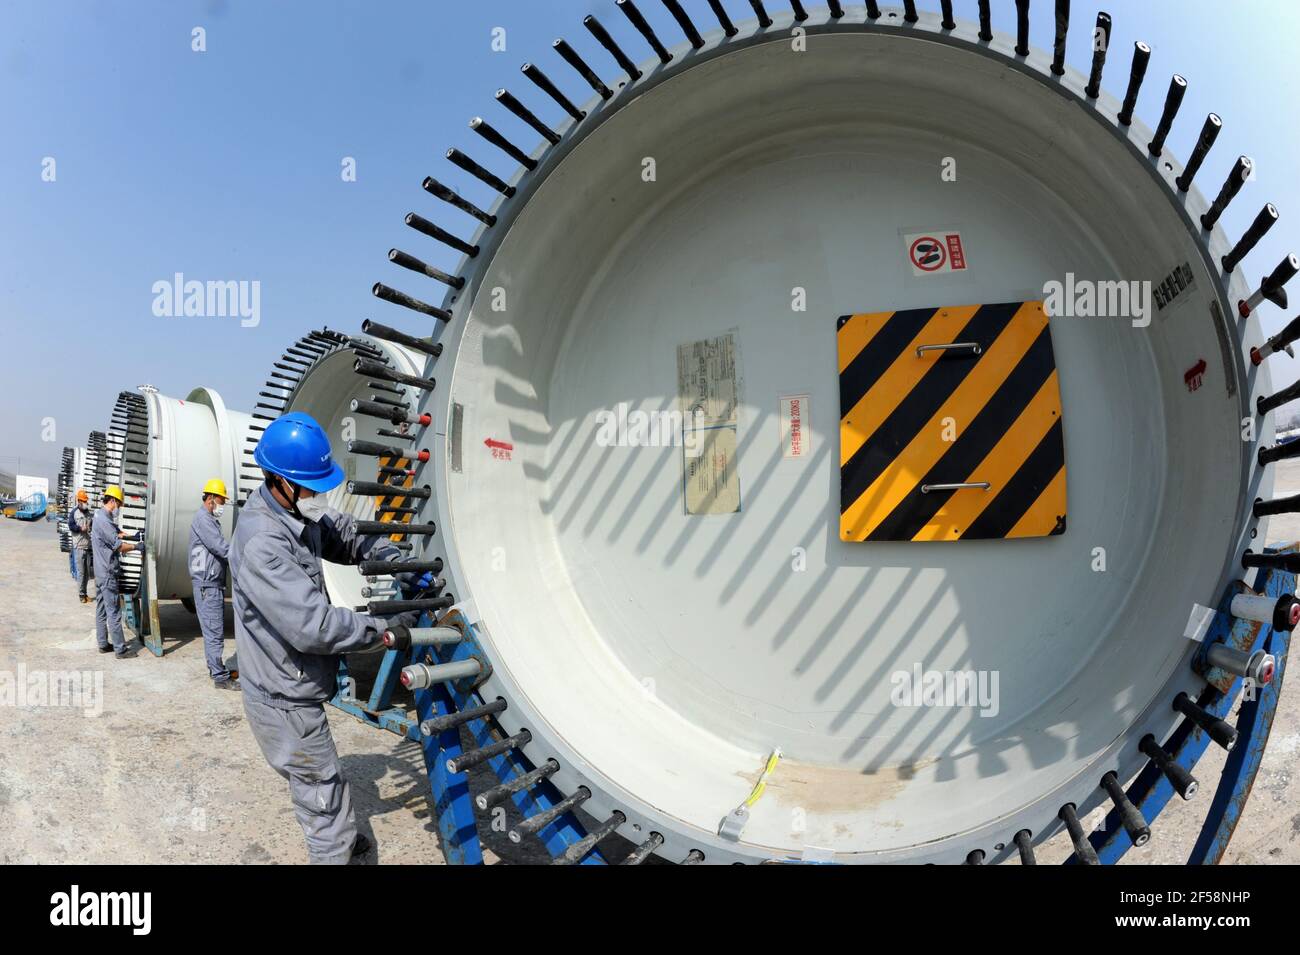 LIANYUNGANG, CHINA - MARCH 25, 2021 - Workers conduct a production operation at a production workshop of national  United Power Technology (Lianyungang) Co., Ltd in Lianyungang, Jiangsu province, China, March 25, 2021. national United Power Technology (Lianyungang) Co., Ltd. continues to carry out product upgrading and innovation, and invests in R&D, manufacturing, sales and commissioning projects of 8-15MW offshore wind turbine and 3.X-5.X onshore large wind turbine. Up to now, the output has increased by 92% compared with the same period last year. (Photo by Wang Chun / Costfoto/Sipa USA) Stock Photo